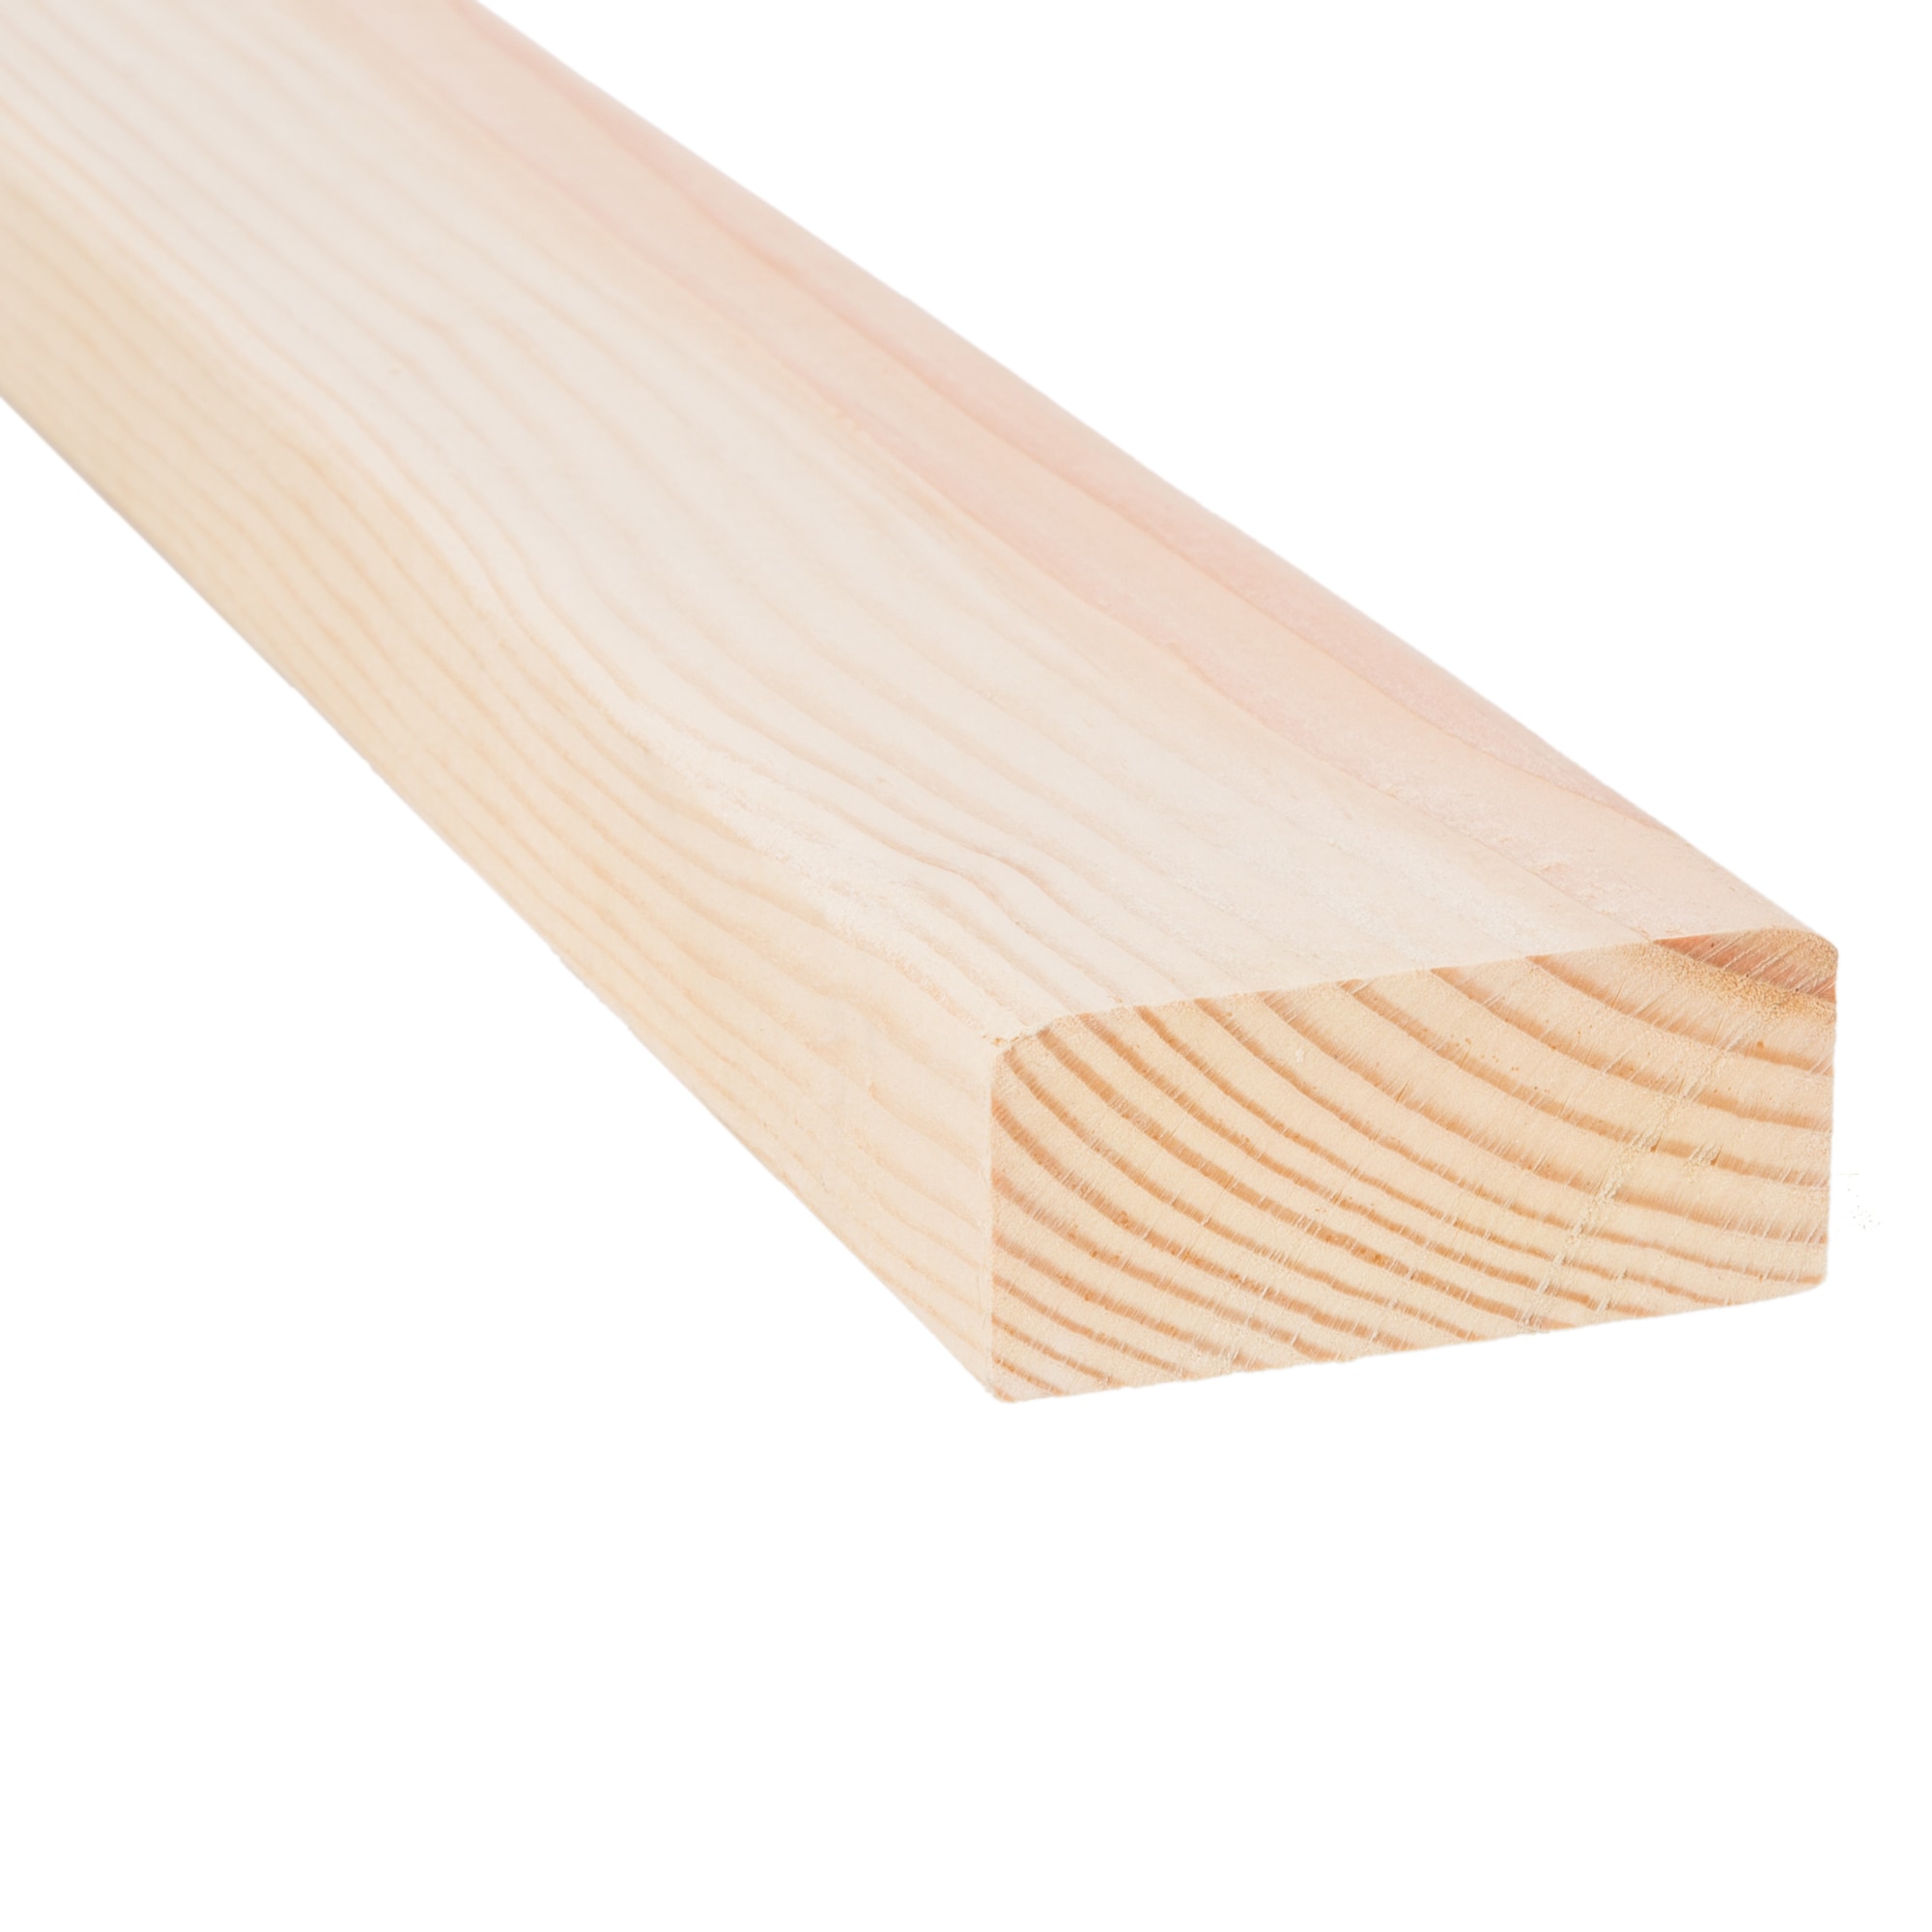 Cedar boards lumber 1/2 or 3/4 surface 4 sides 36" 